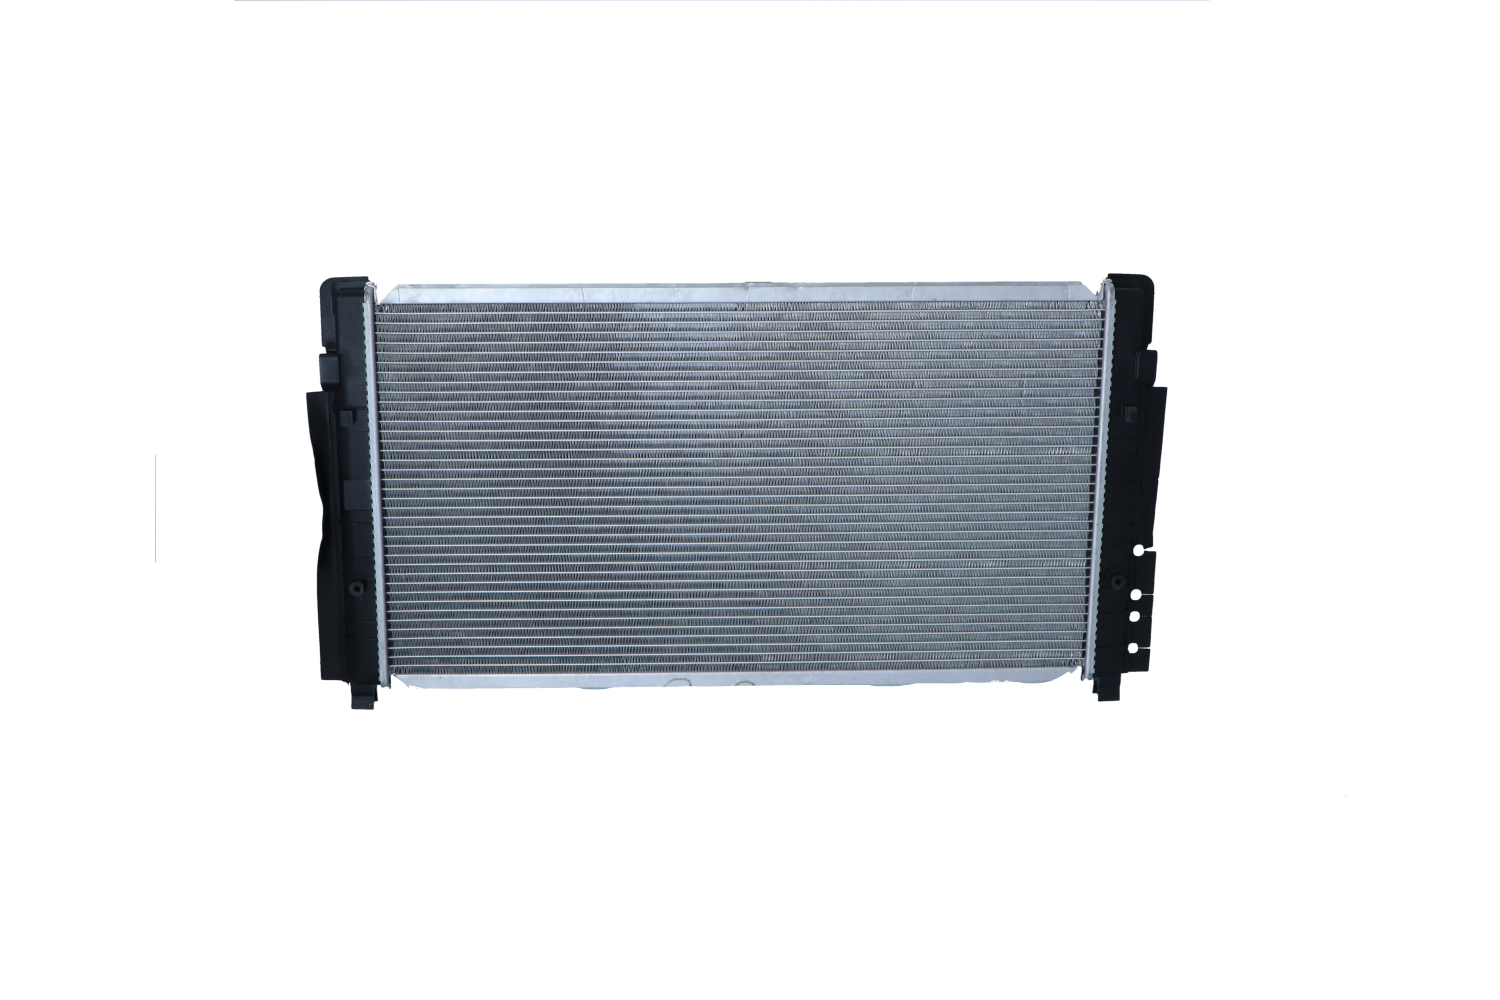 NRF 509515 Engine radiator Aluminium, 720 x 390 x 24 mm, with mounting parts, Brazed cooling fins